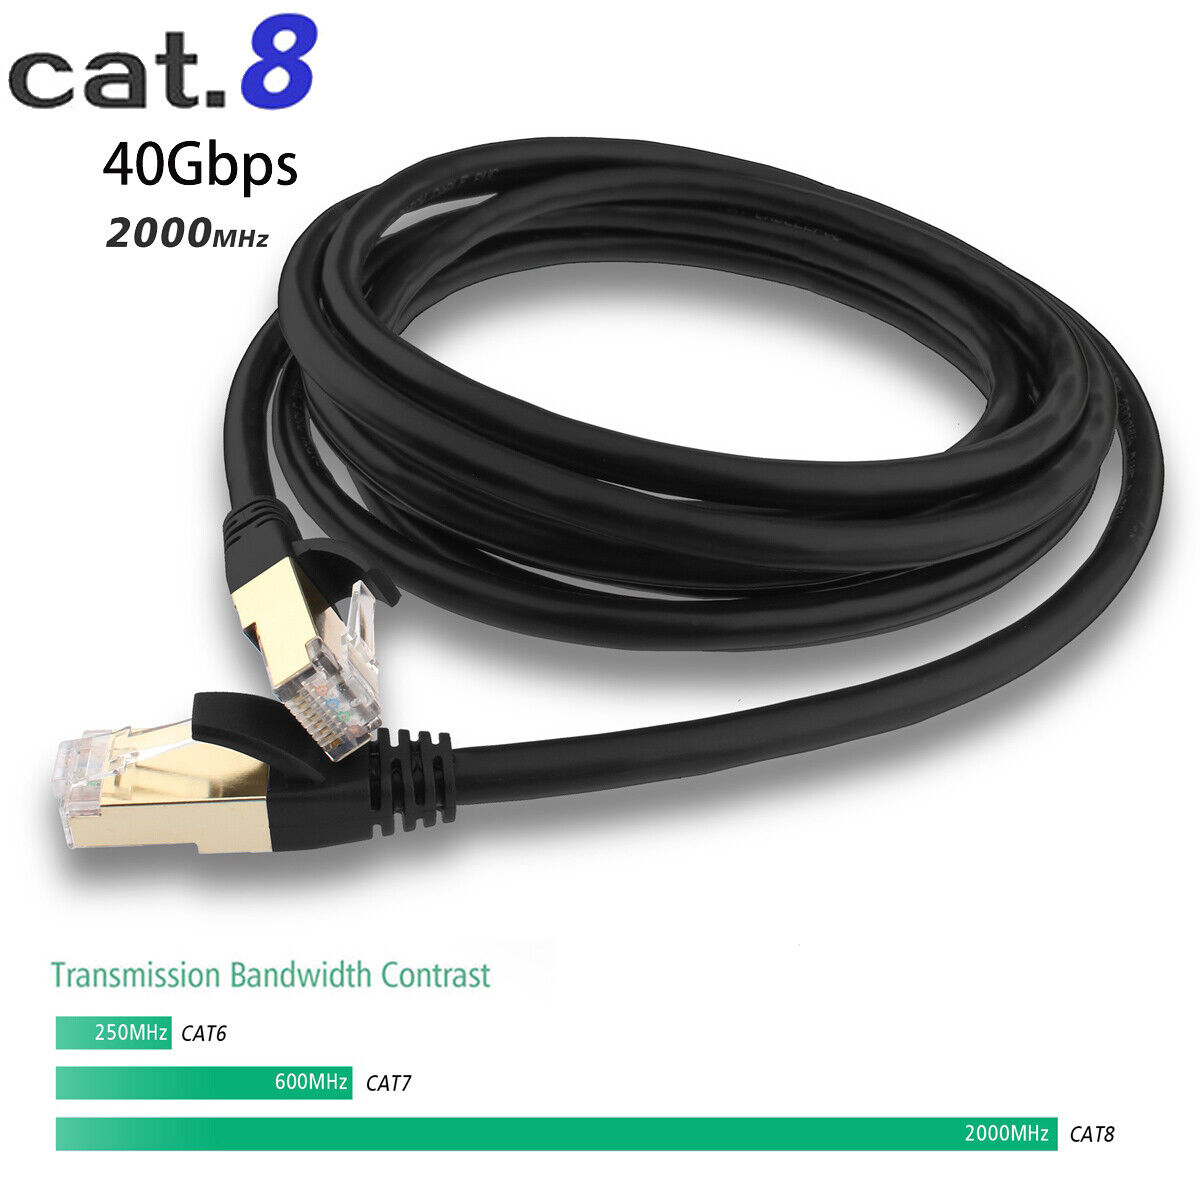 2000MHZ 40GBPS Premium Cat 8 Cable for PC, Router, Gaming, Xbox, IP Cam, Modem